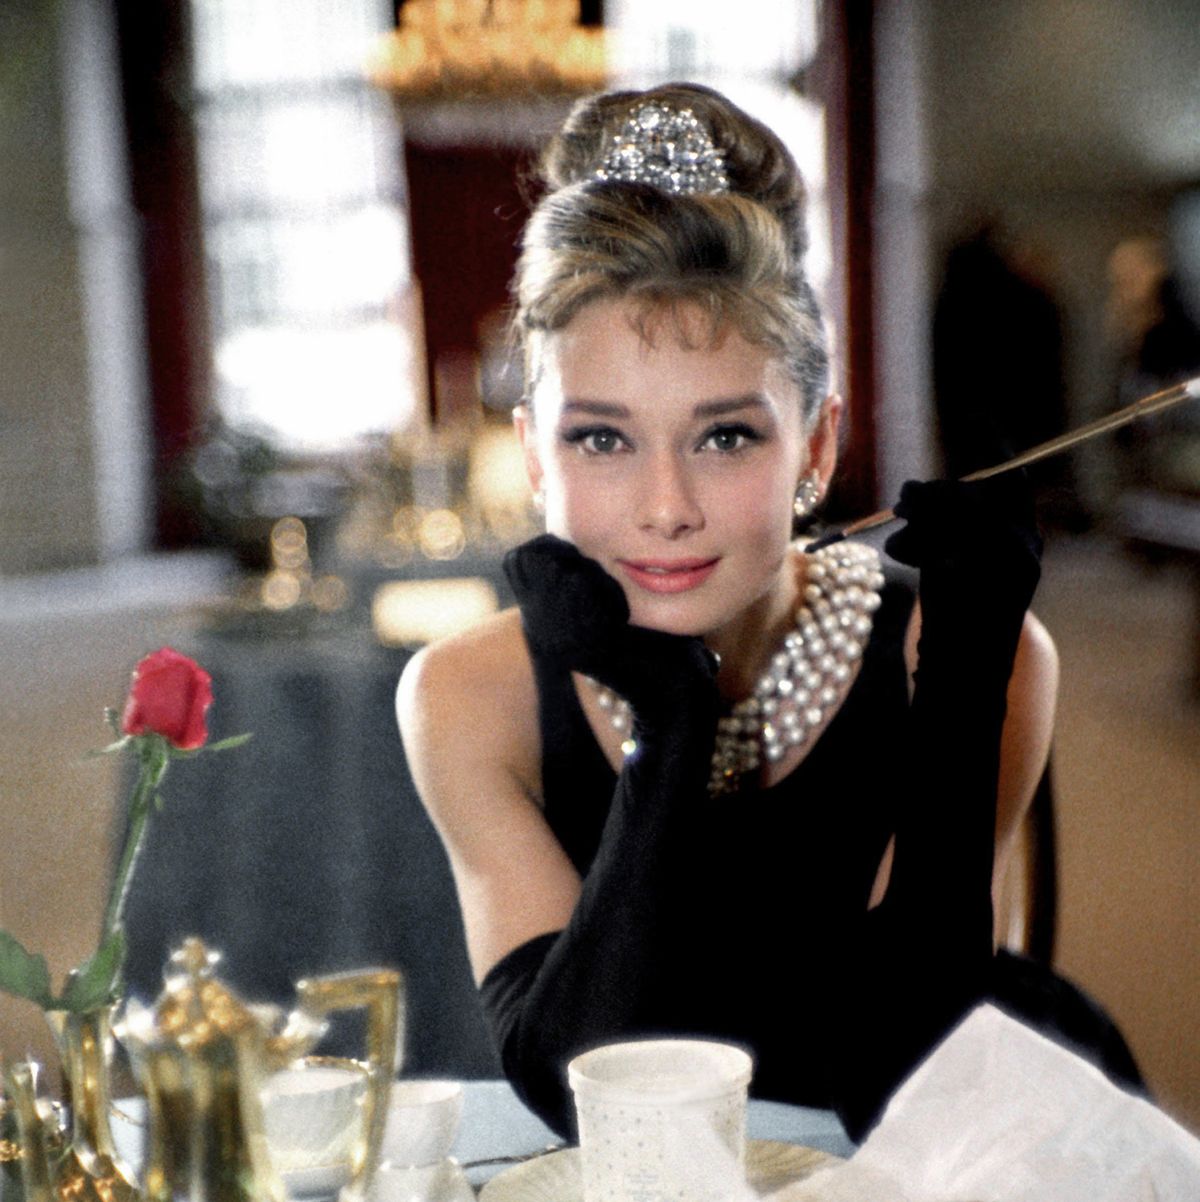 You can now eat breakfast at Tiffany's in real life